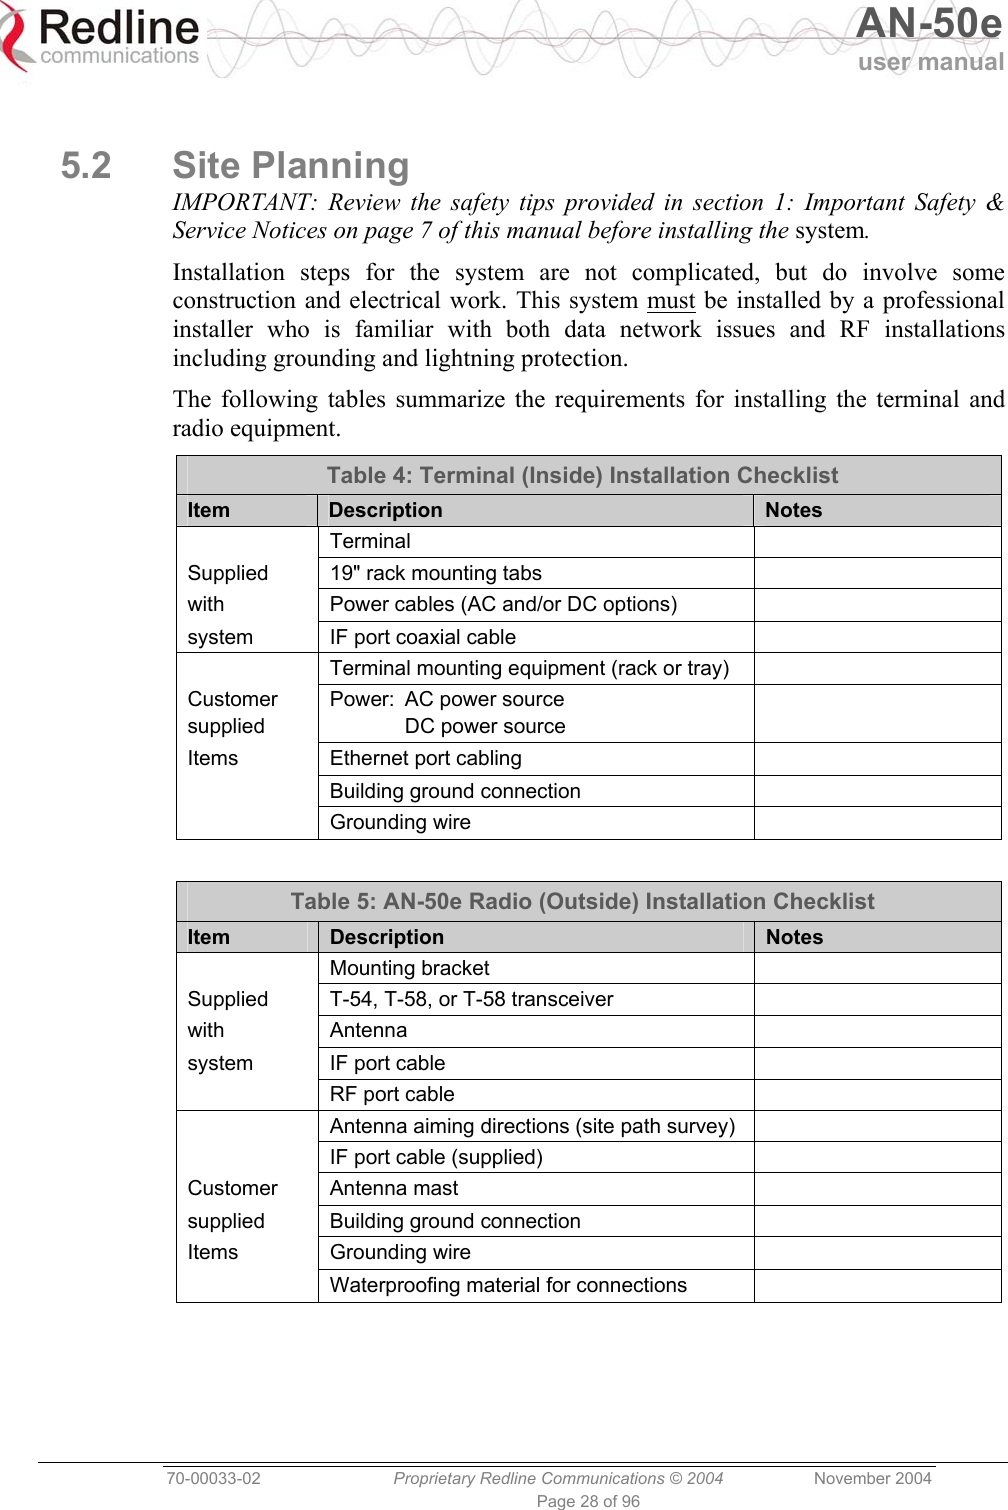   AN-50e user manual  70-00033-02  Proprietary Redline Communications © 2004 November 2004 Page 28 of 96  5.2 Site Planning IMPORTANT: Review the safety tips provided in section 1: Important Safety &amp; Service Notices on page 7 of this manual before installing the system. Installation steps for the system are not complicated, but do involve some construction and electrical work. This system must be installed by a professional installer who is familiar with both data network issues and RF installations including grounding and lightning protection. The following tables summarize the requirements for installing the terminal and radio equipment. Table 4: Terminal (Inside) Installation Checklist Item  Description  Notes  Terminal  Supplied  19&quot; rack mounting tabs   with  Power cables (AC and/or DC options)   system  IF port coaxial cable      Terminal mounting equipment (rack or tray)   Customer supplied Power: AC power source   DC power source  Items  Ethernet port cabling     Building ground connection    Grounding wire    Table 5: AN-50e Radio (Outside) Installation Checklist Item  Description  Notes  Mounting bracket   Supplied  T-54, T-58, or T-58 transceiver   with Antenna   system  IF port cable     RF port cable     Antenna aiming directions (site path survey)     IF port cable (supplied)   Customer Antenna mast   supplied  Building ground connection   Items Grounding wire     Waterproofing material for connections    